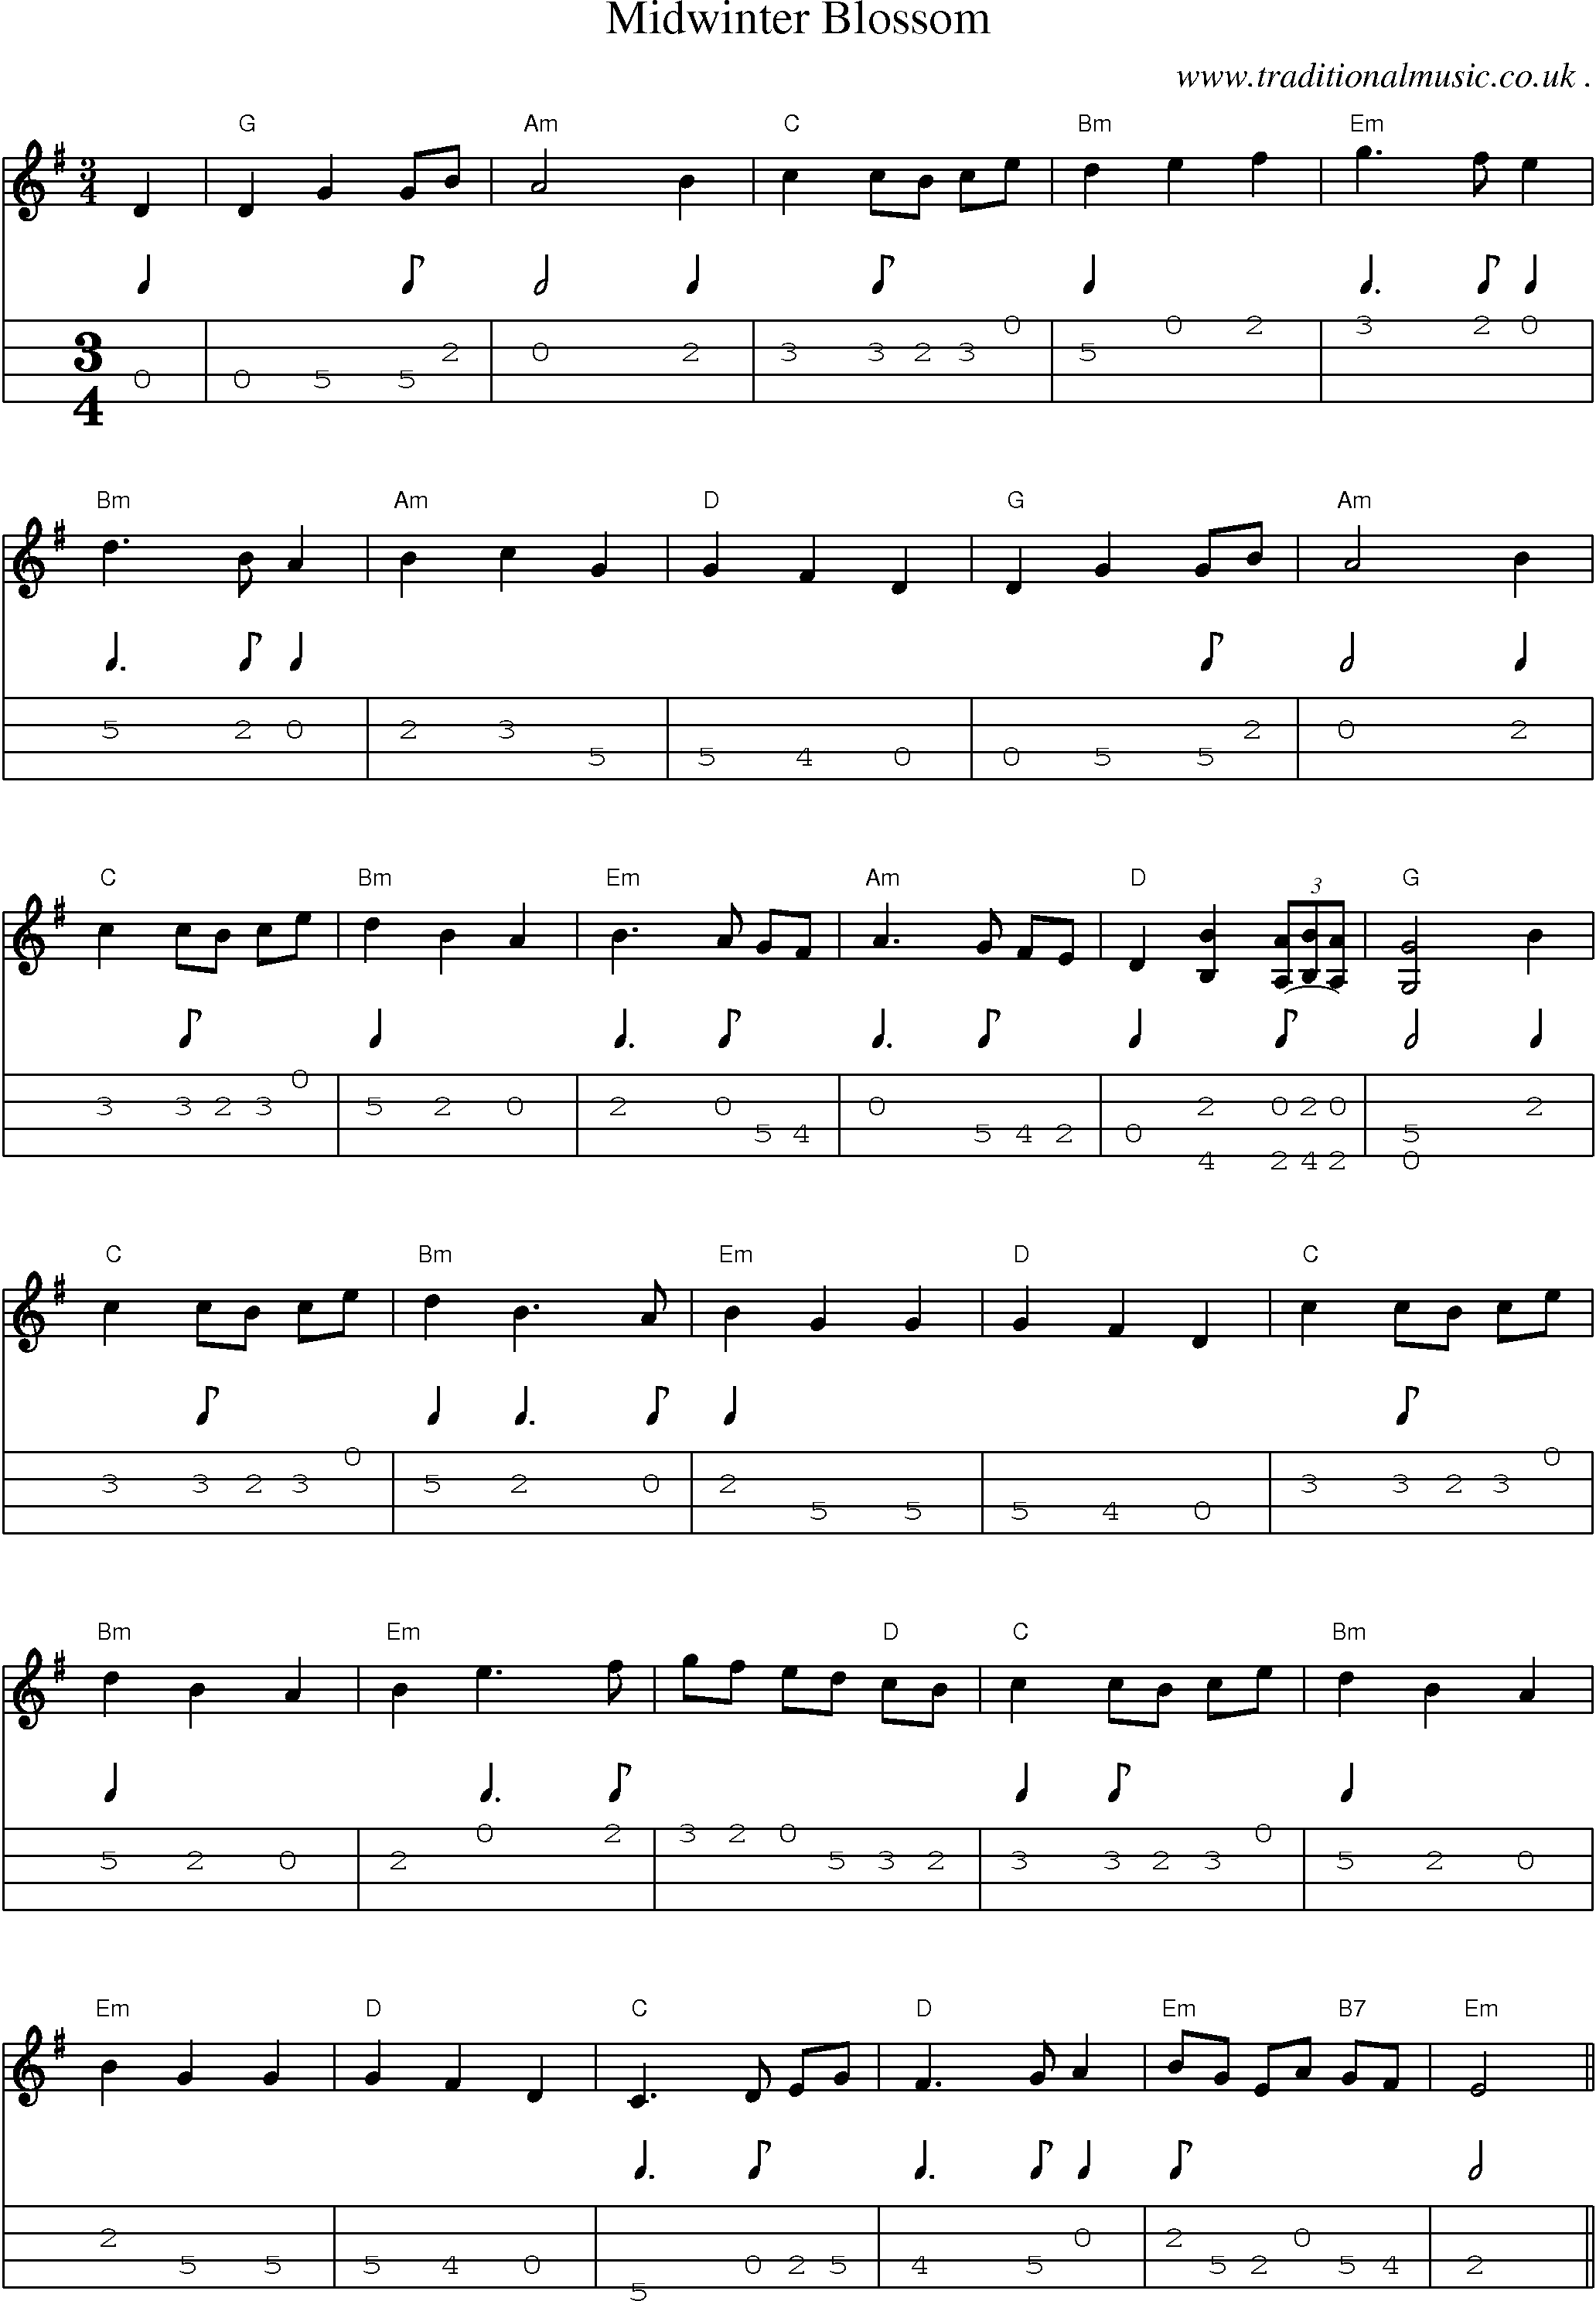 Music Score and Guitar Tabs for Midwinter Blossom